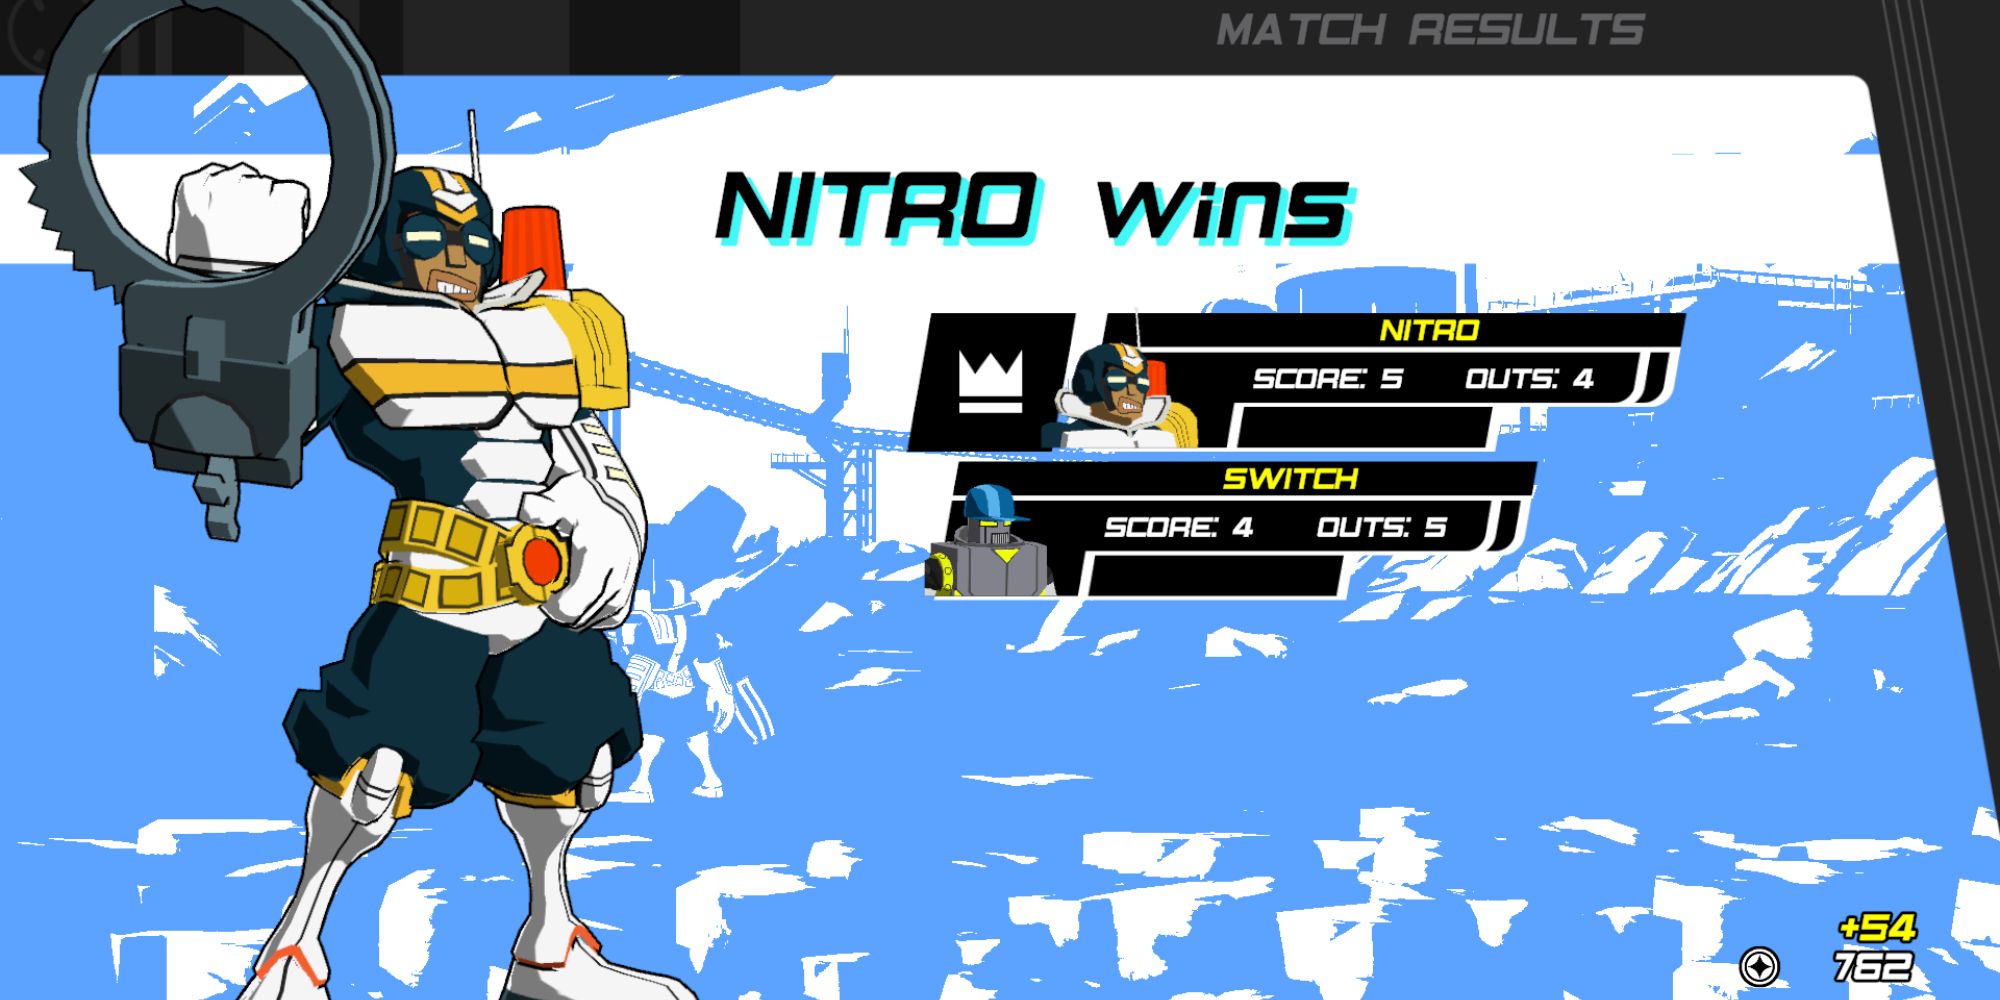 Lethal League Blaze a mid shot of Nitro on the left with the words "Nitro Wins" to his right and beneath the amount of points and outs each player has against a blue and white background